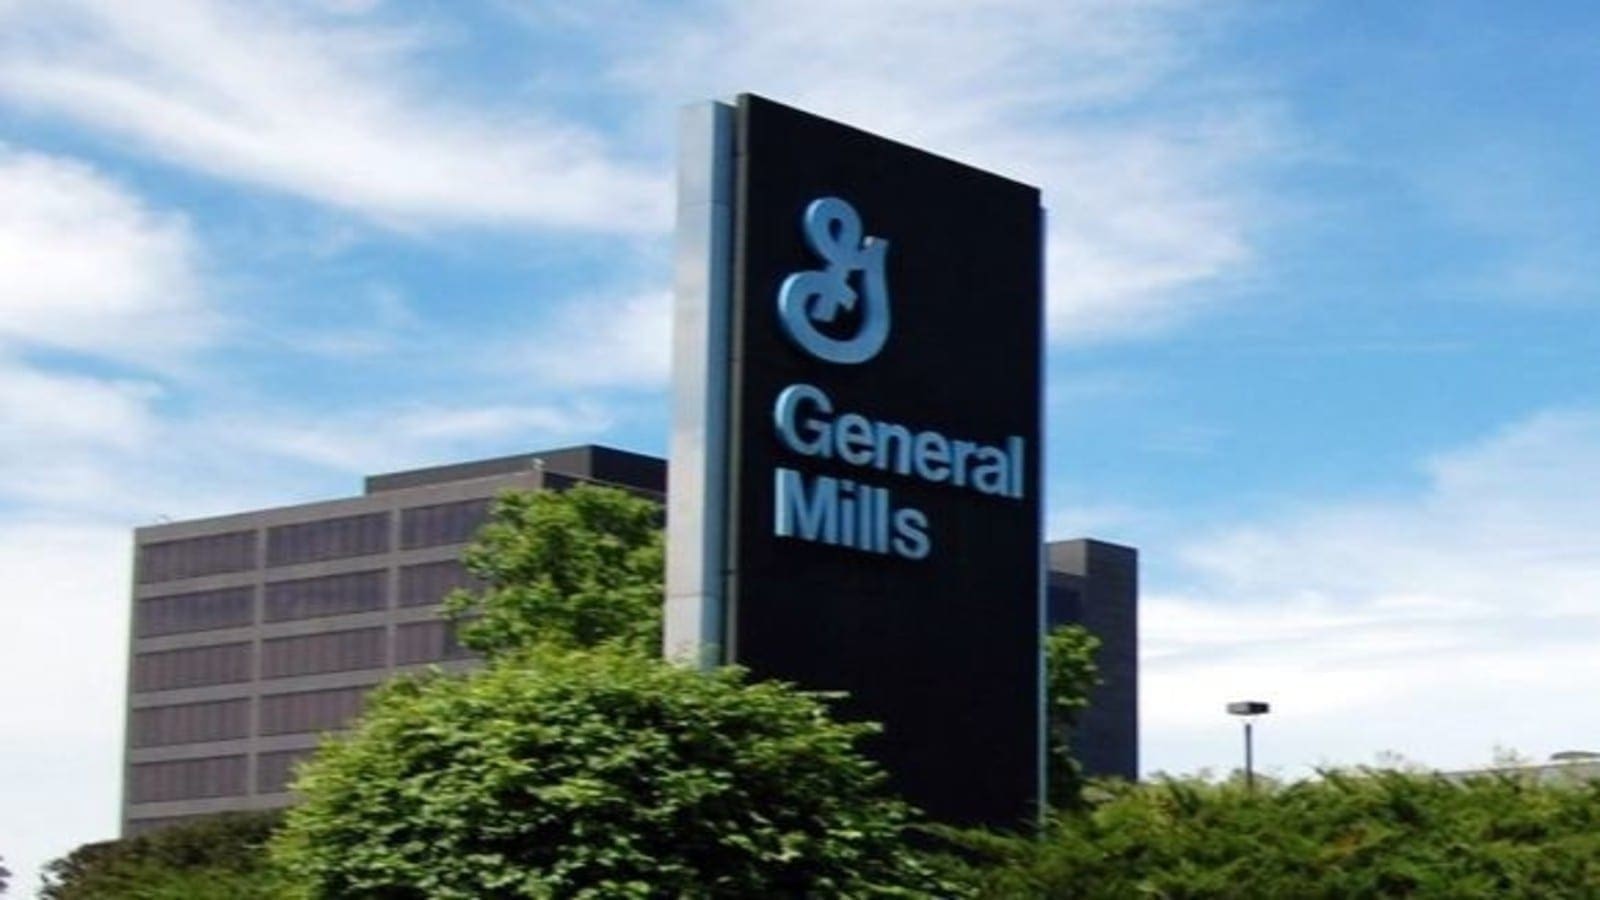 General Mills Q3 profits jump 27% buoyed by elevated at-home food demand